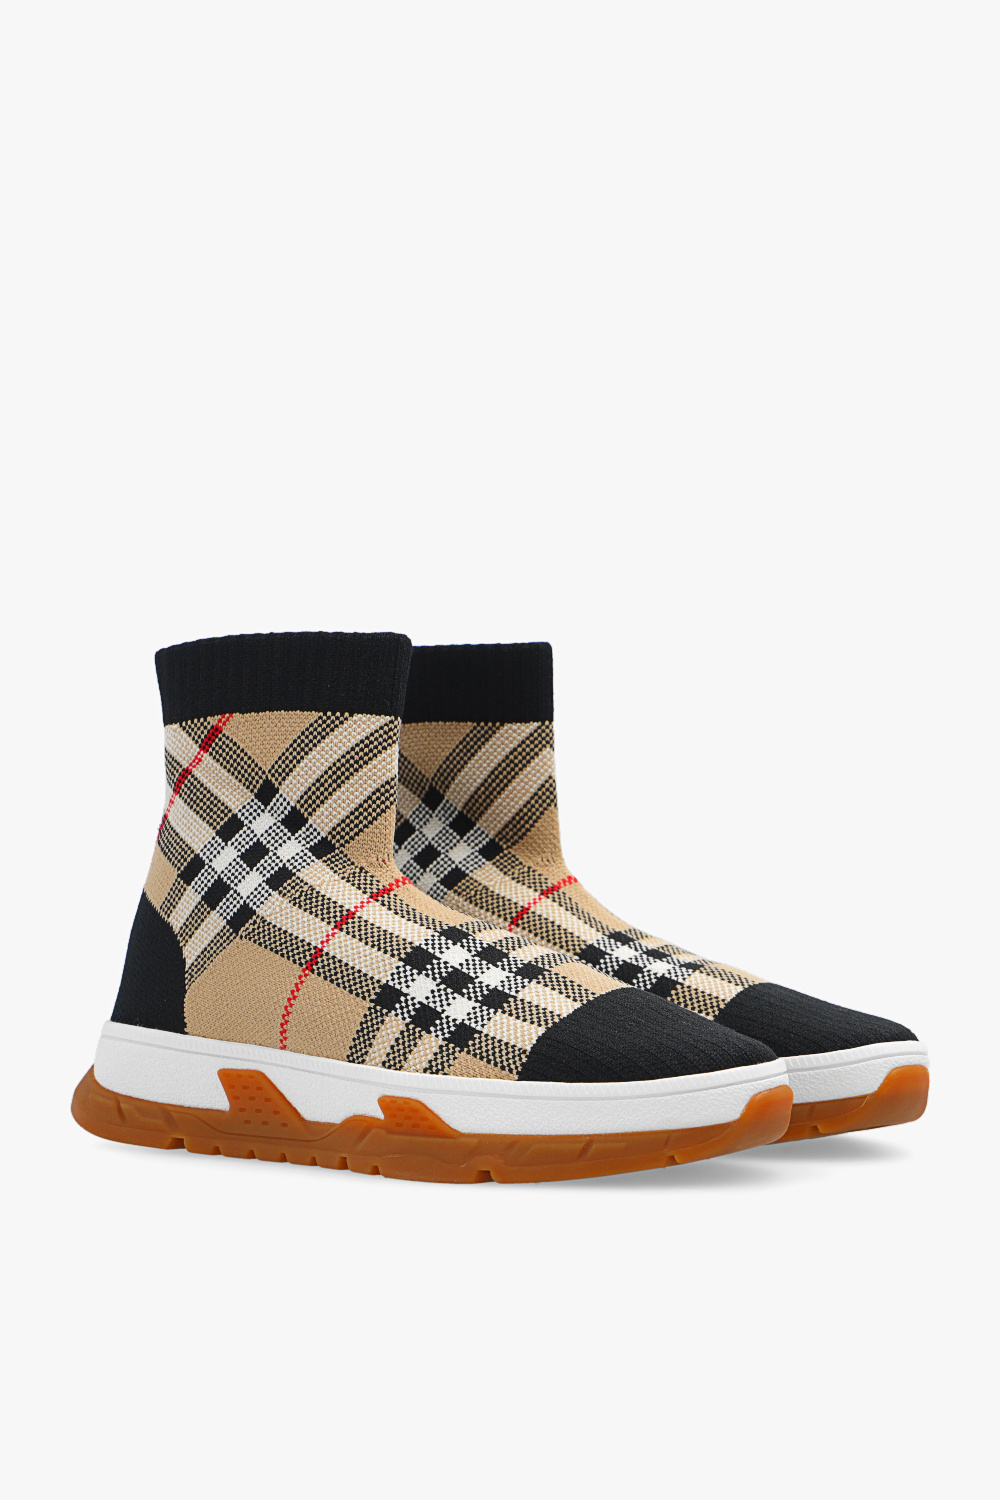 burberry checked Kids Sock sneakers